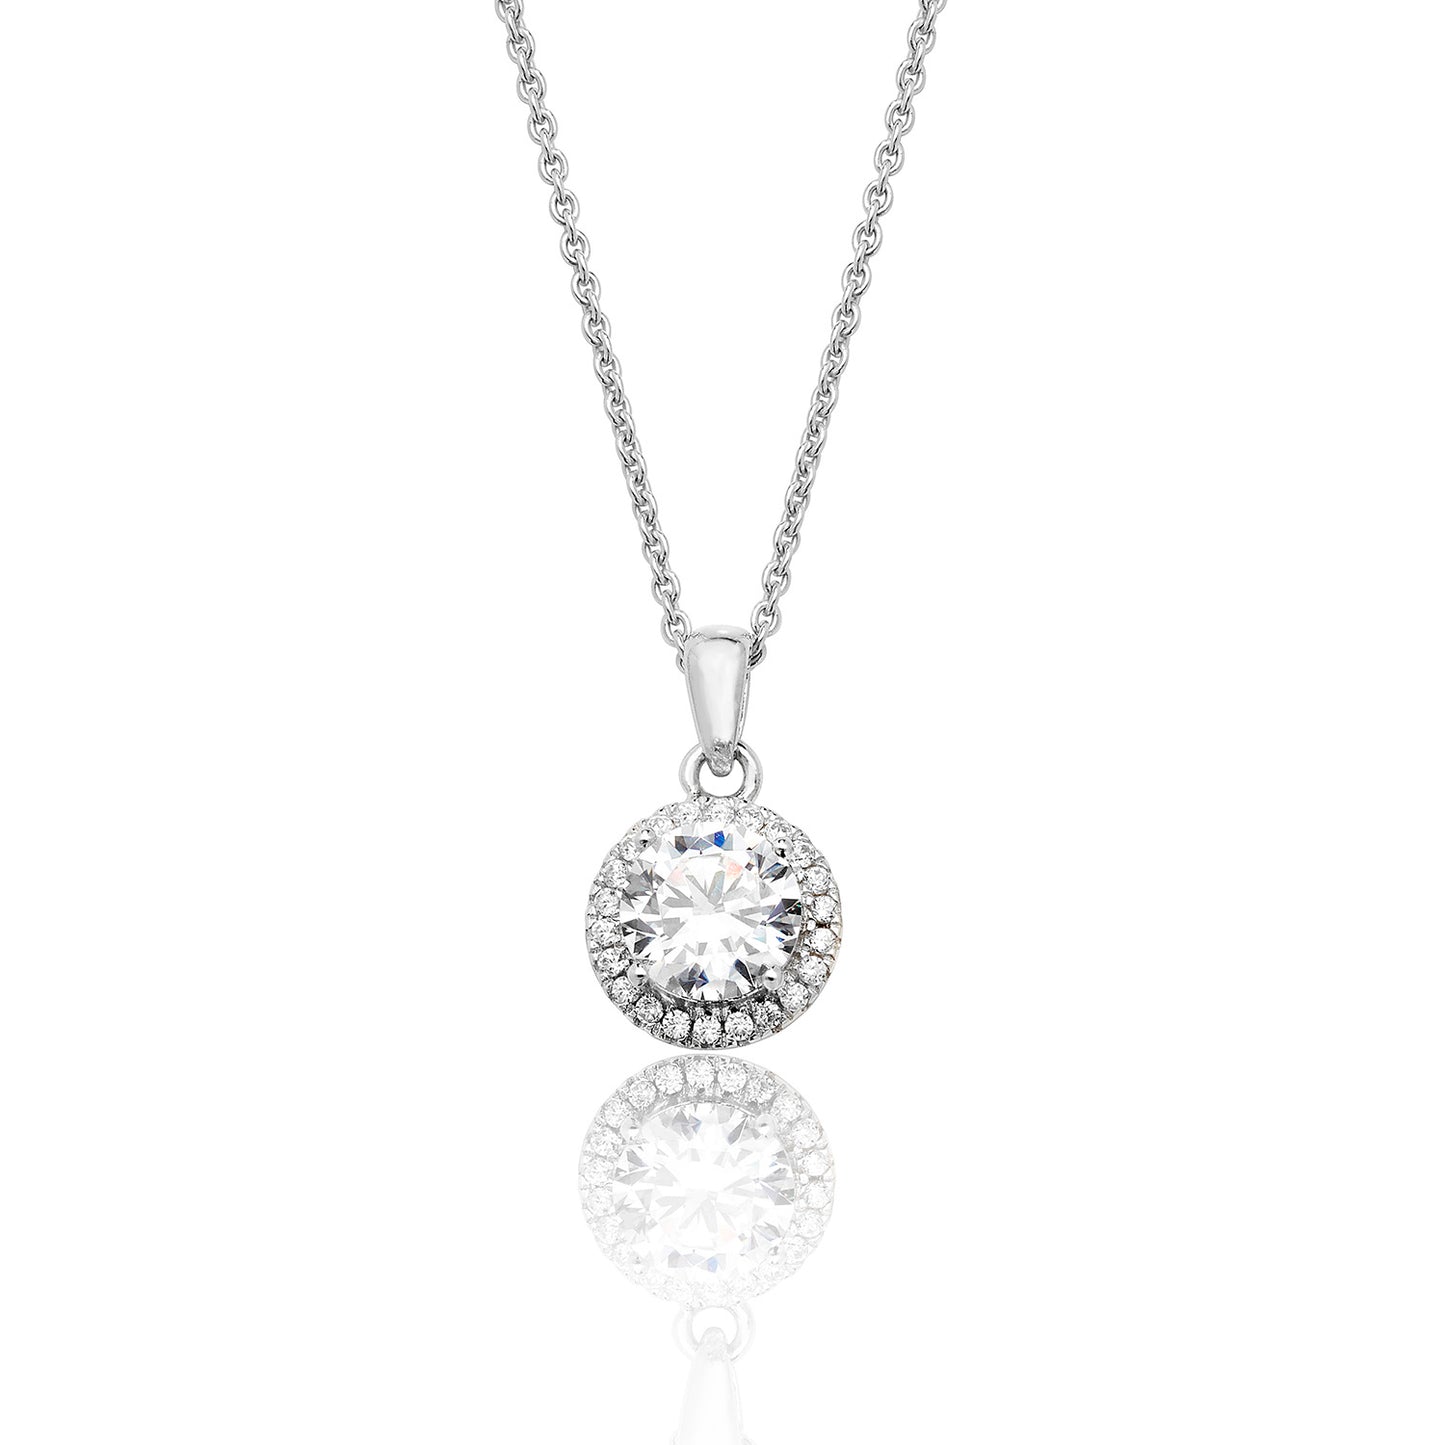 Sterling Silver Round & Halo Pendant Necklace